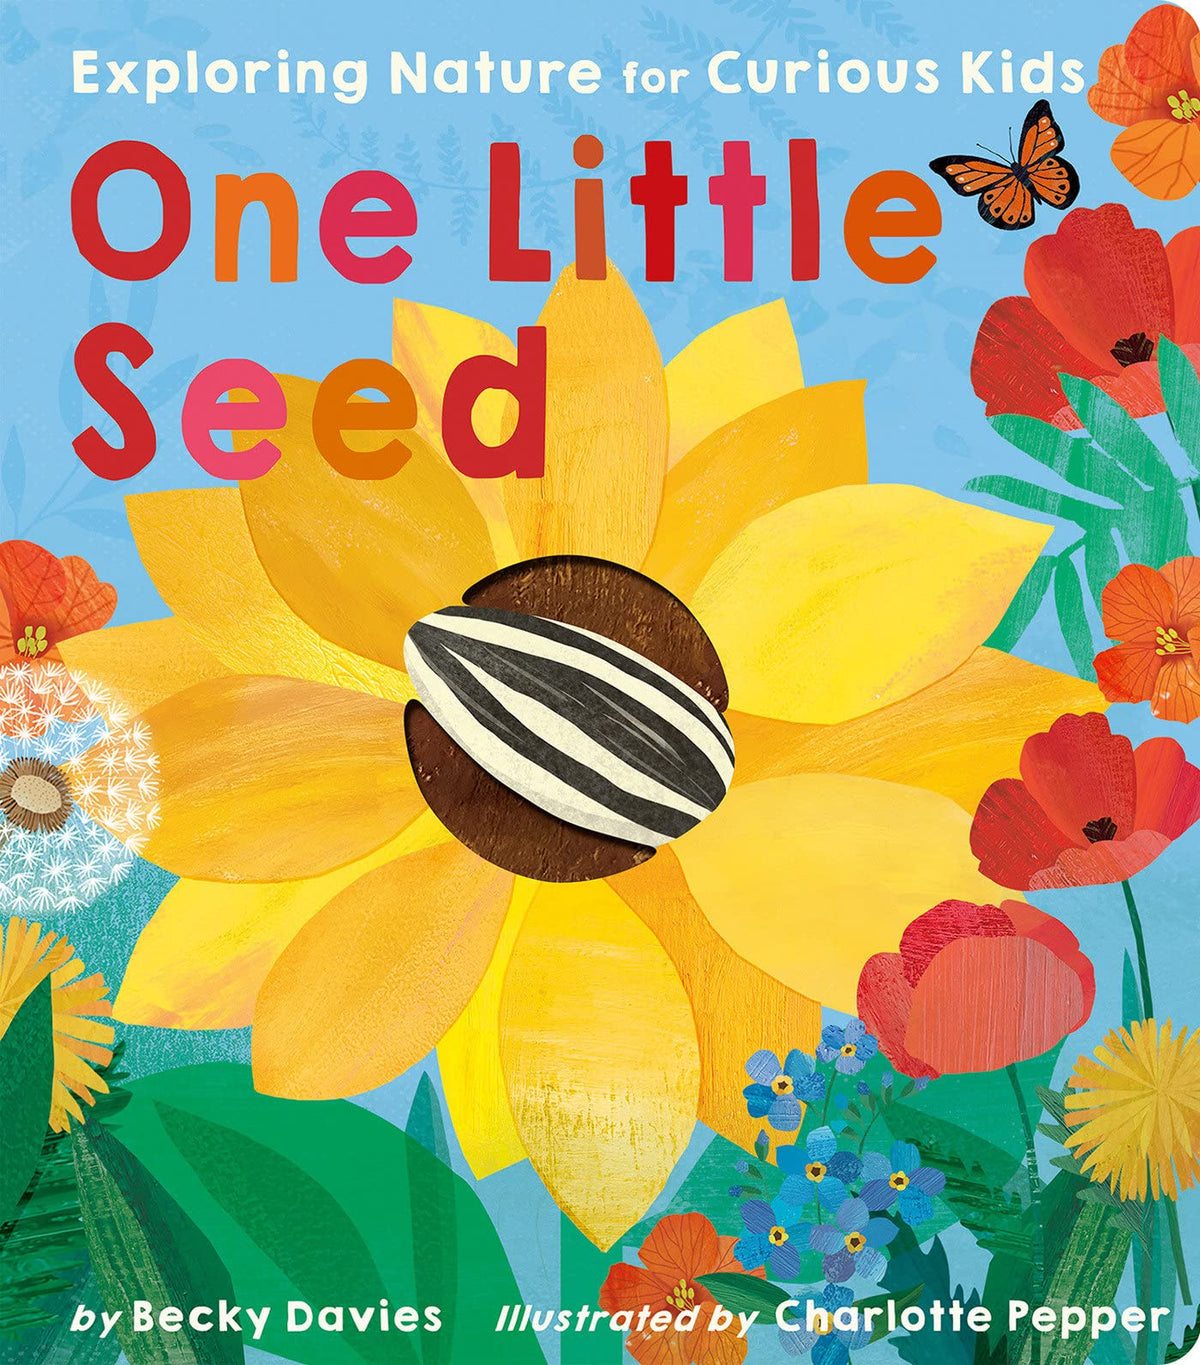 Exploring Nature for Curious Kids: One Little Seed